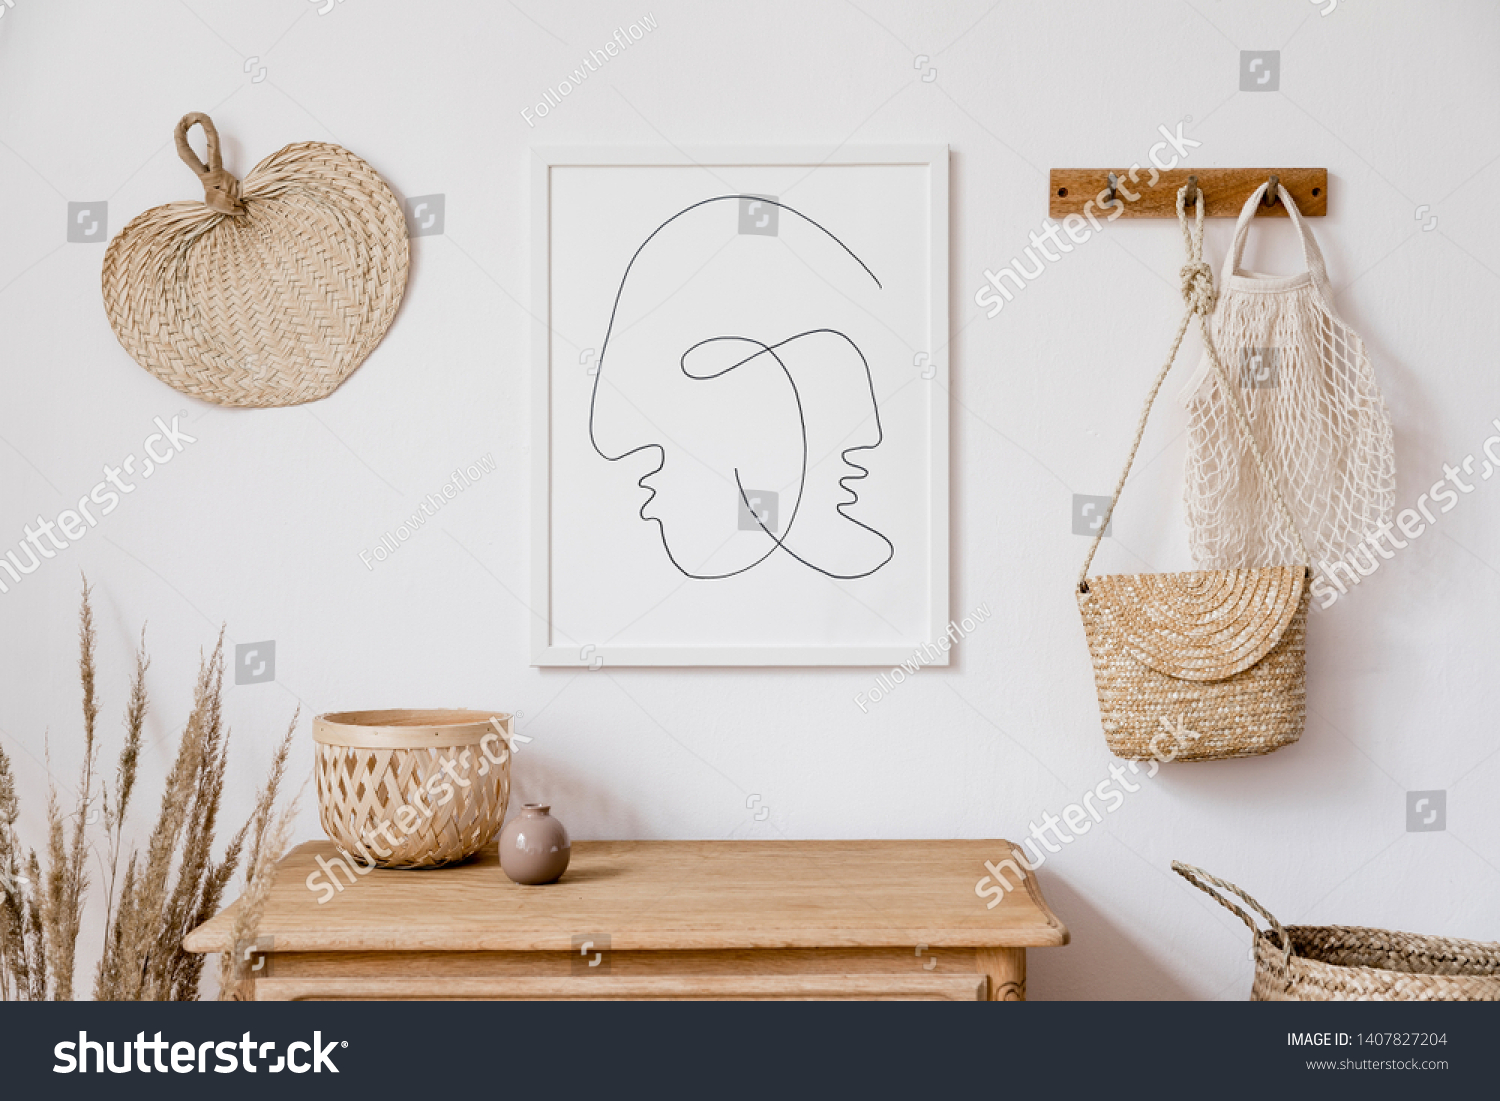 Stylish korean interior of living room with white mock up poster frame, elegant accessories, flowers in vase, wooden shelf and hanging rattan leaf, bags. Minimalistic concept of home decor. Template.  #1407827204